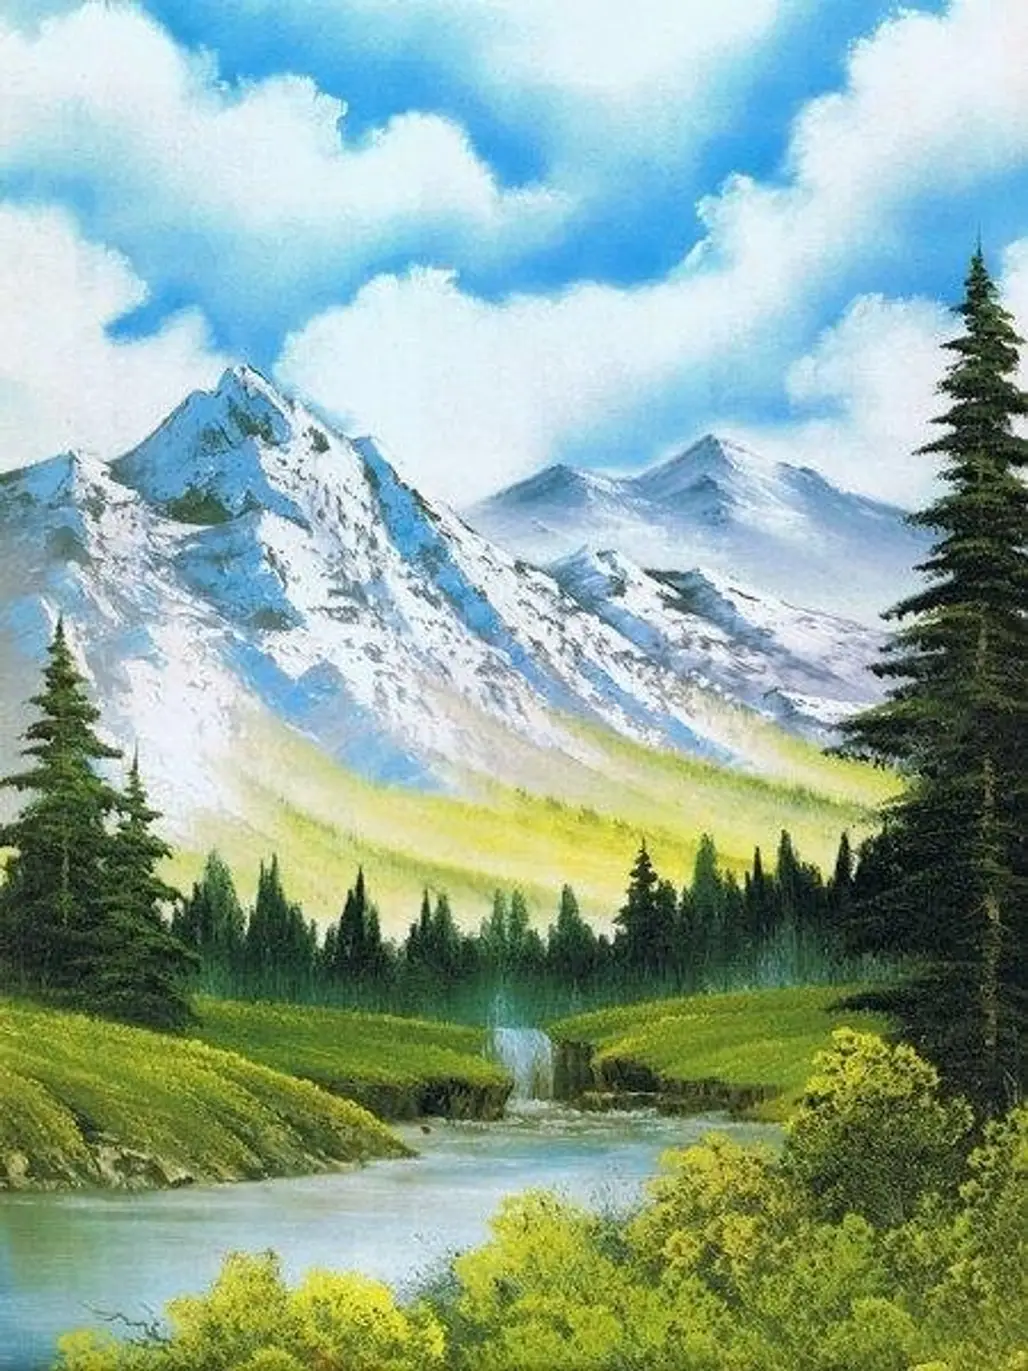 Do a Bob Ross Painting